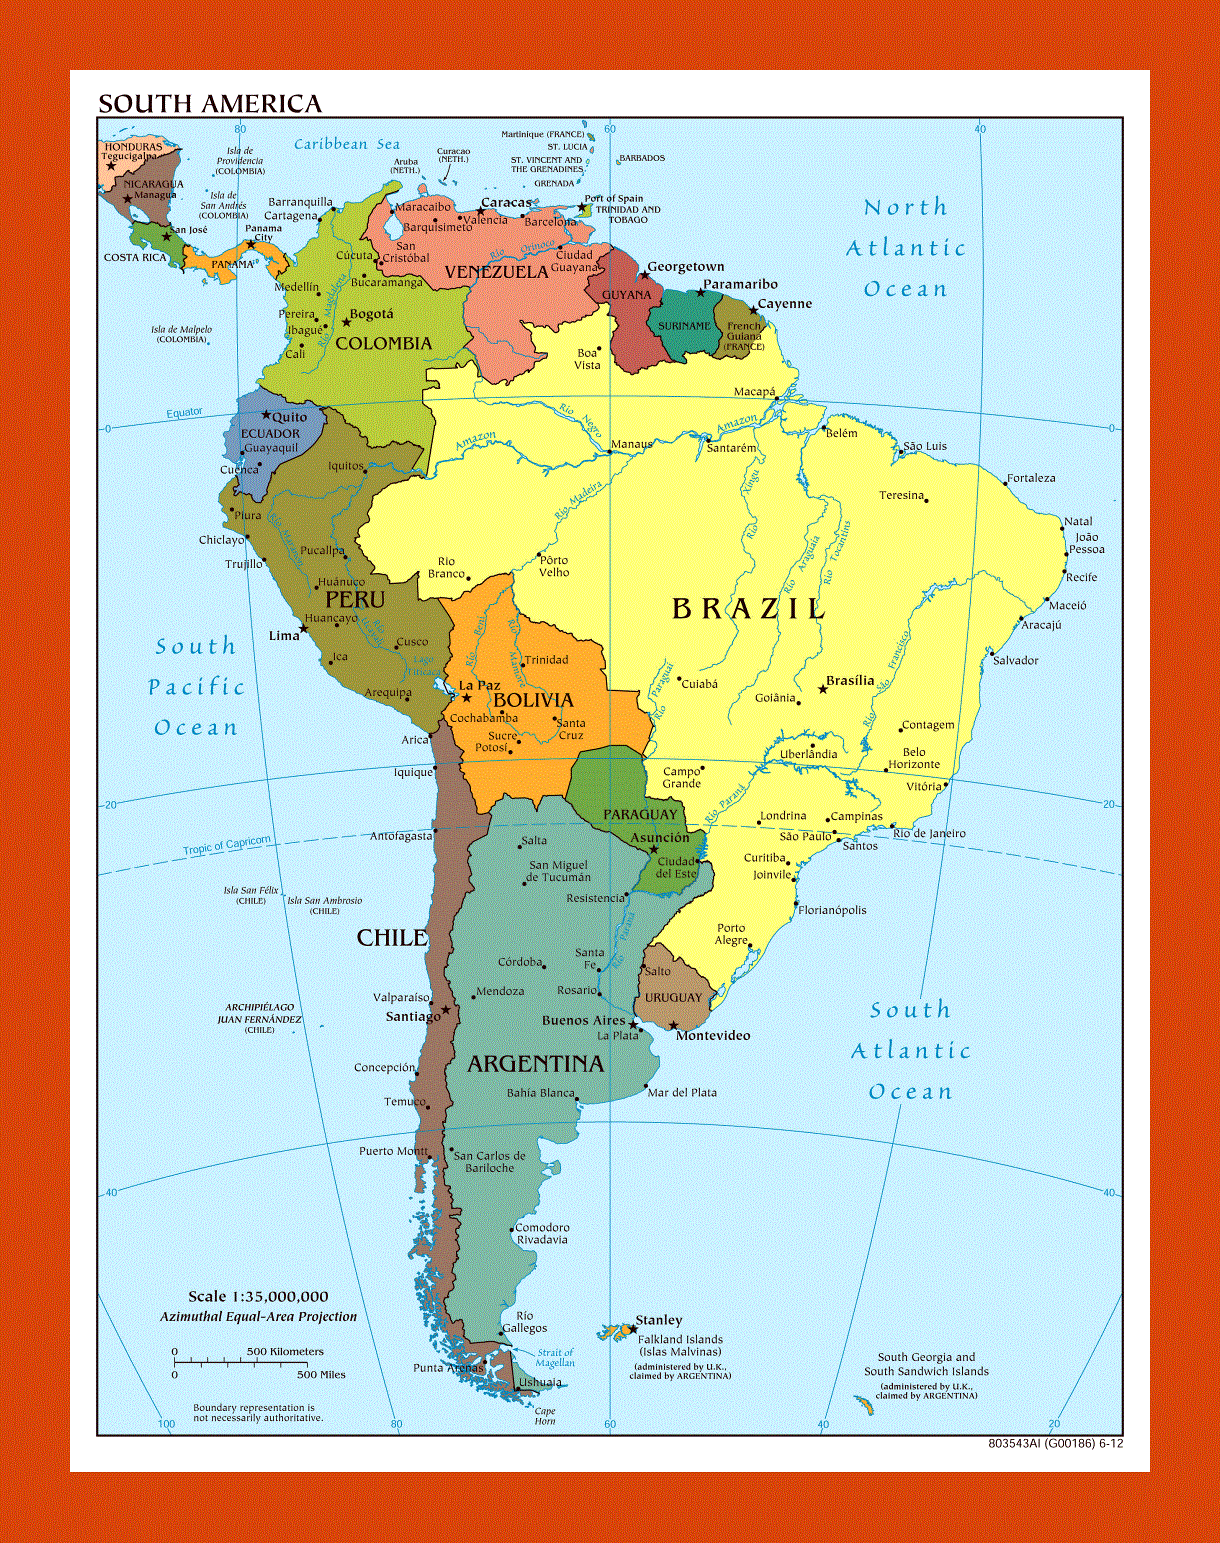 Political map of South America - 2012